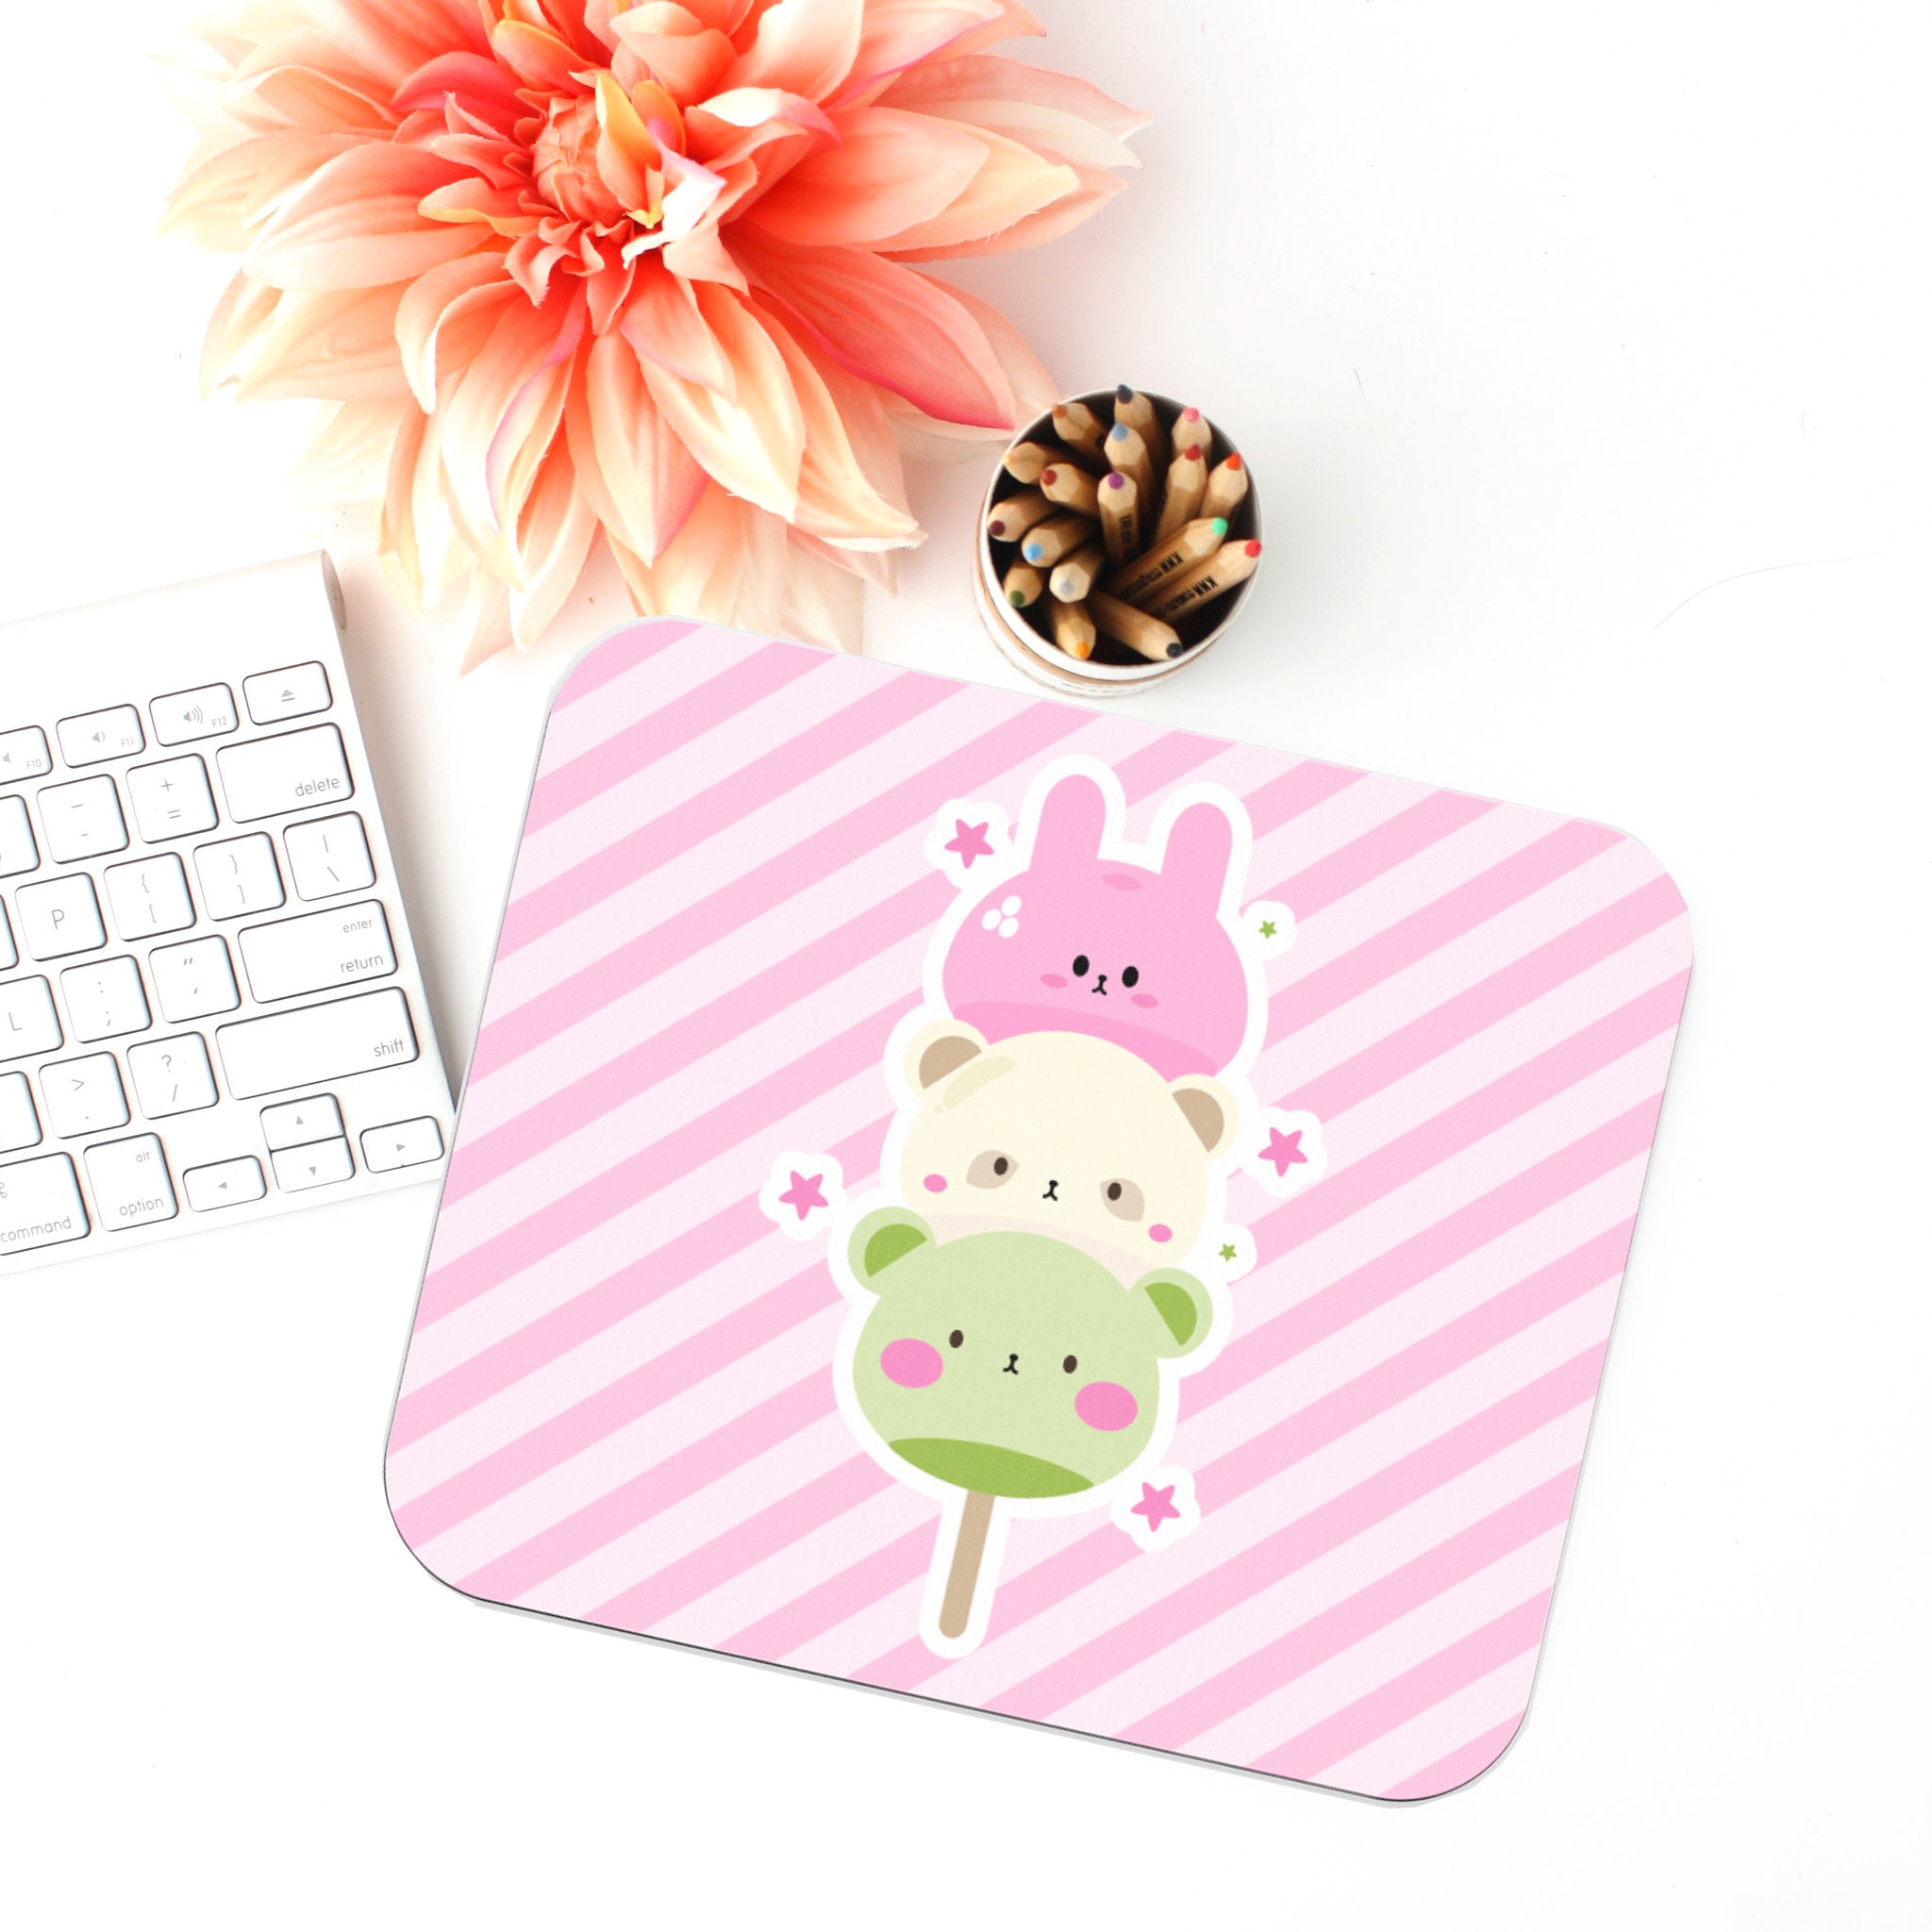 Mochi Print Mouse Pad, Desk Accessories, Office Decor for Women, Office Gifts, Co-worker Gift, Work From Home Gift, Kawaii Mochi Mouse Pad